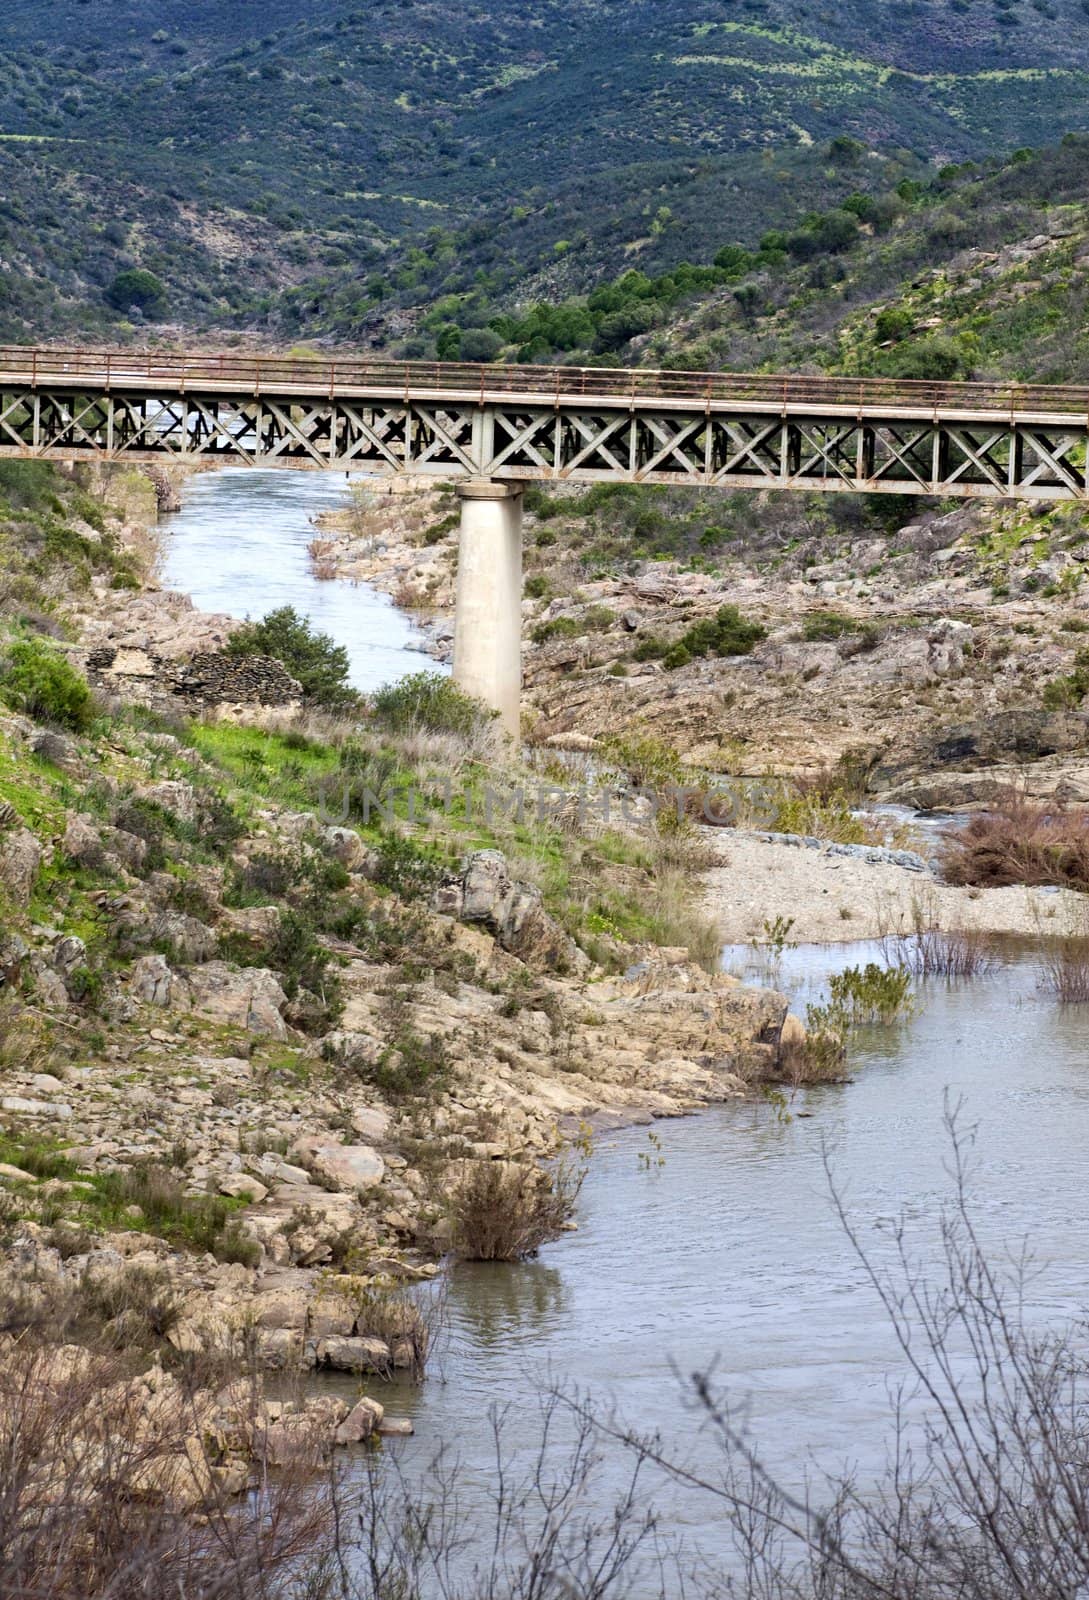 View of the a bridge over the Vascao river on the Algarve, Portugal.